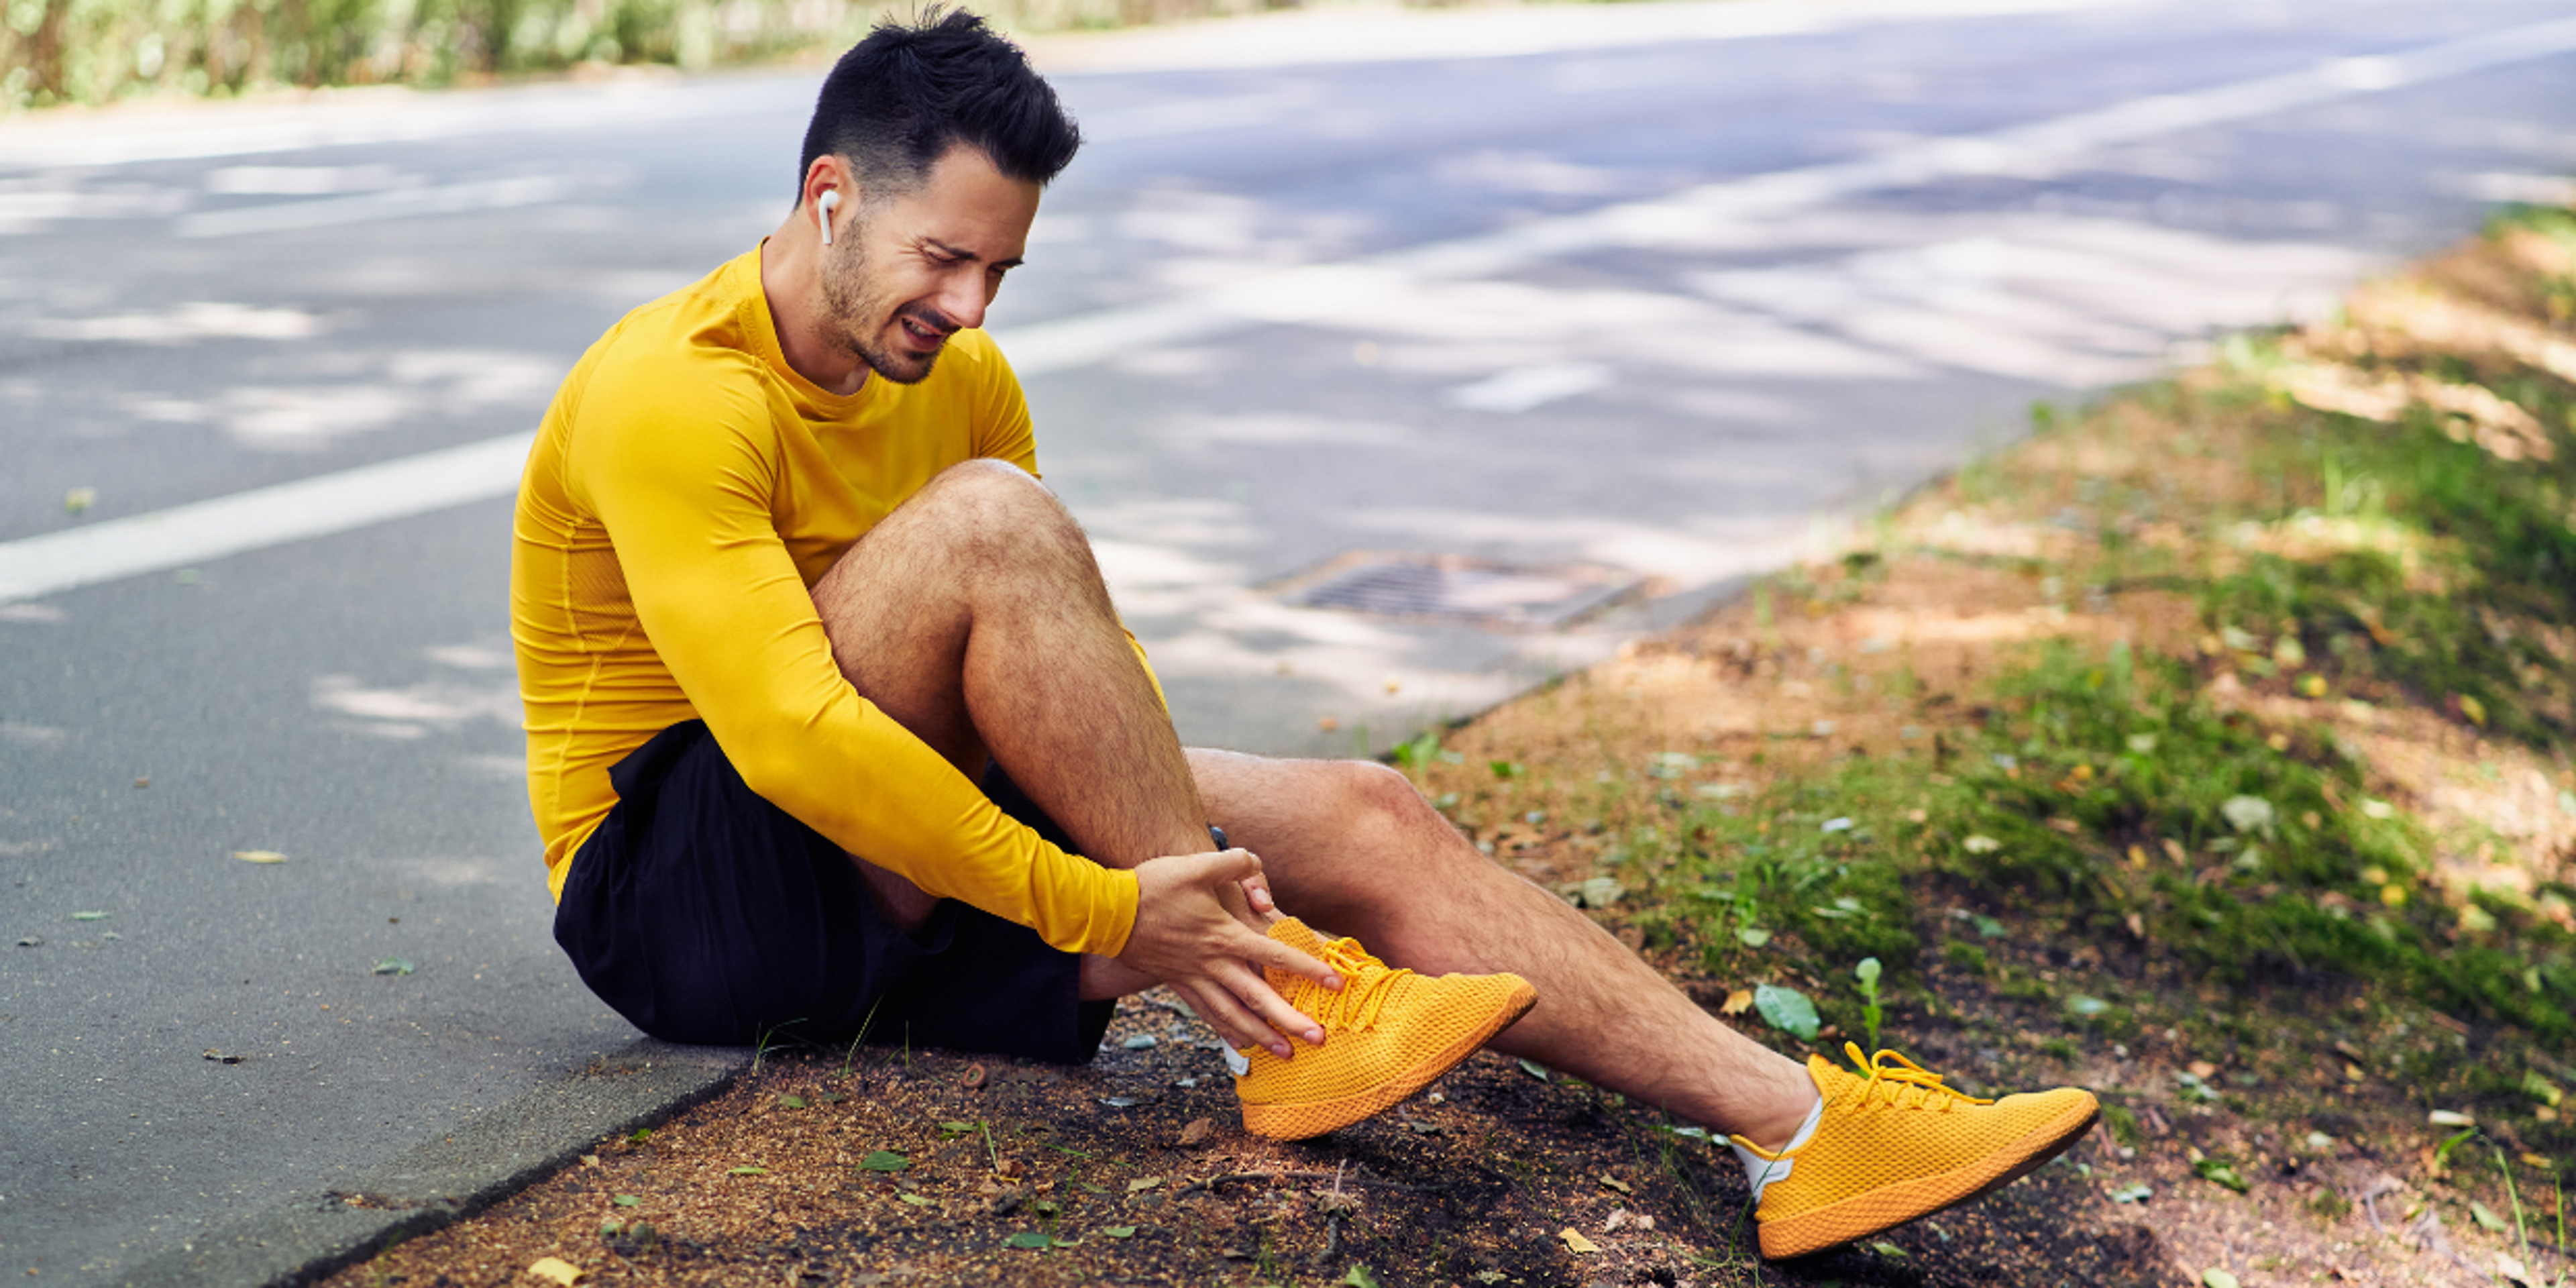 Ankle Sprains: The Types, Causes, and Best Treatments